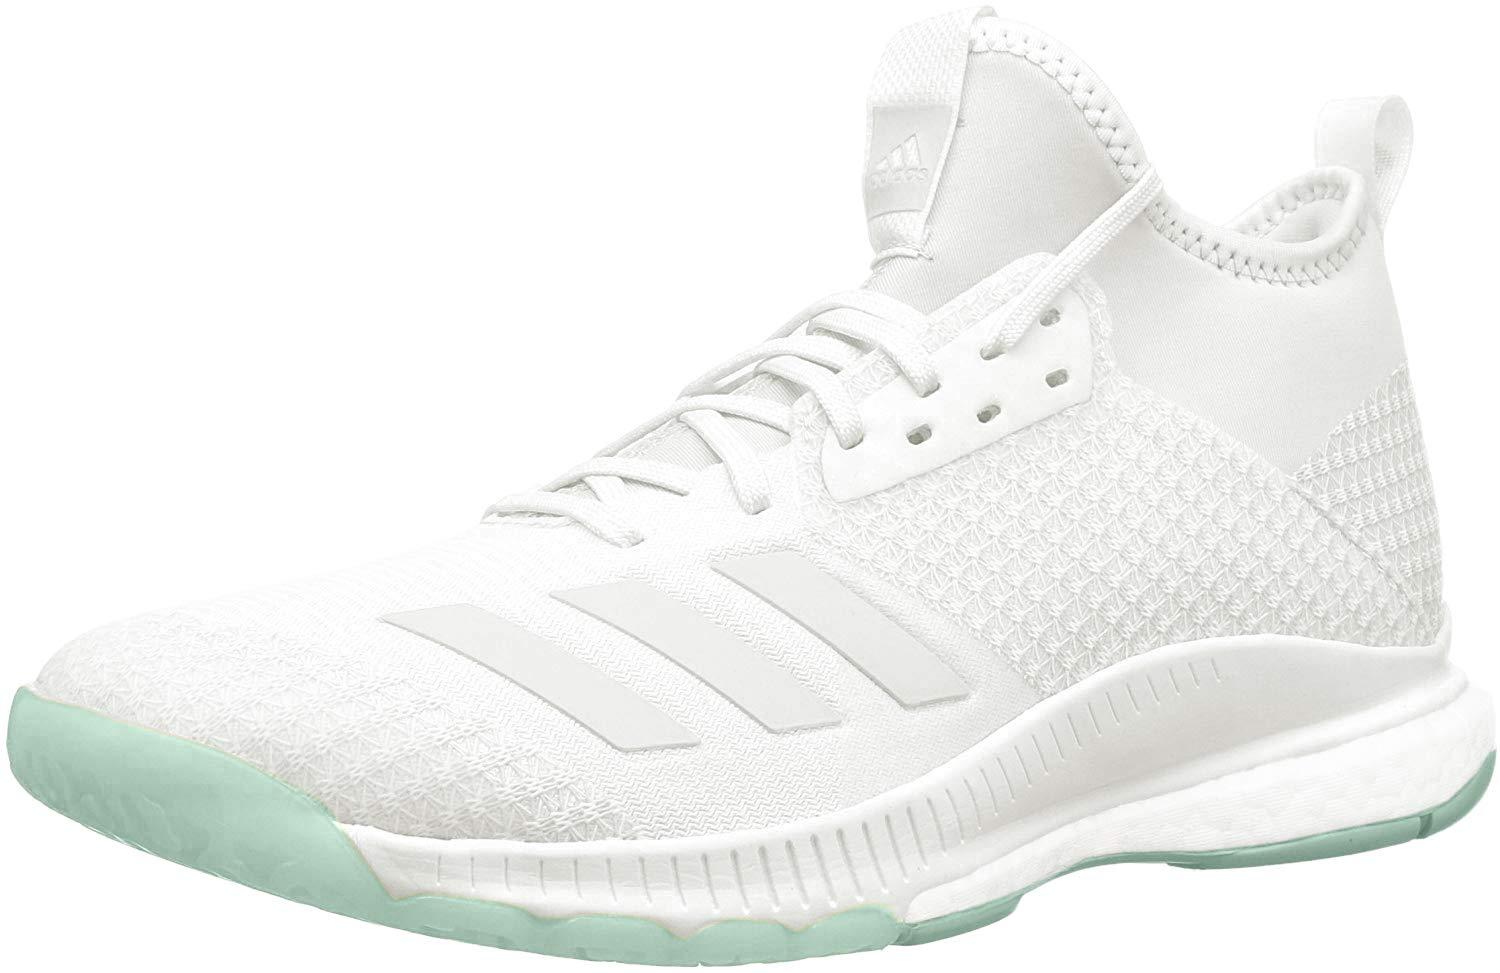 adidas Crazyflight X 2 Mid Volleyball Shoe in White | Lyst